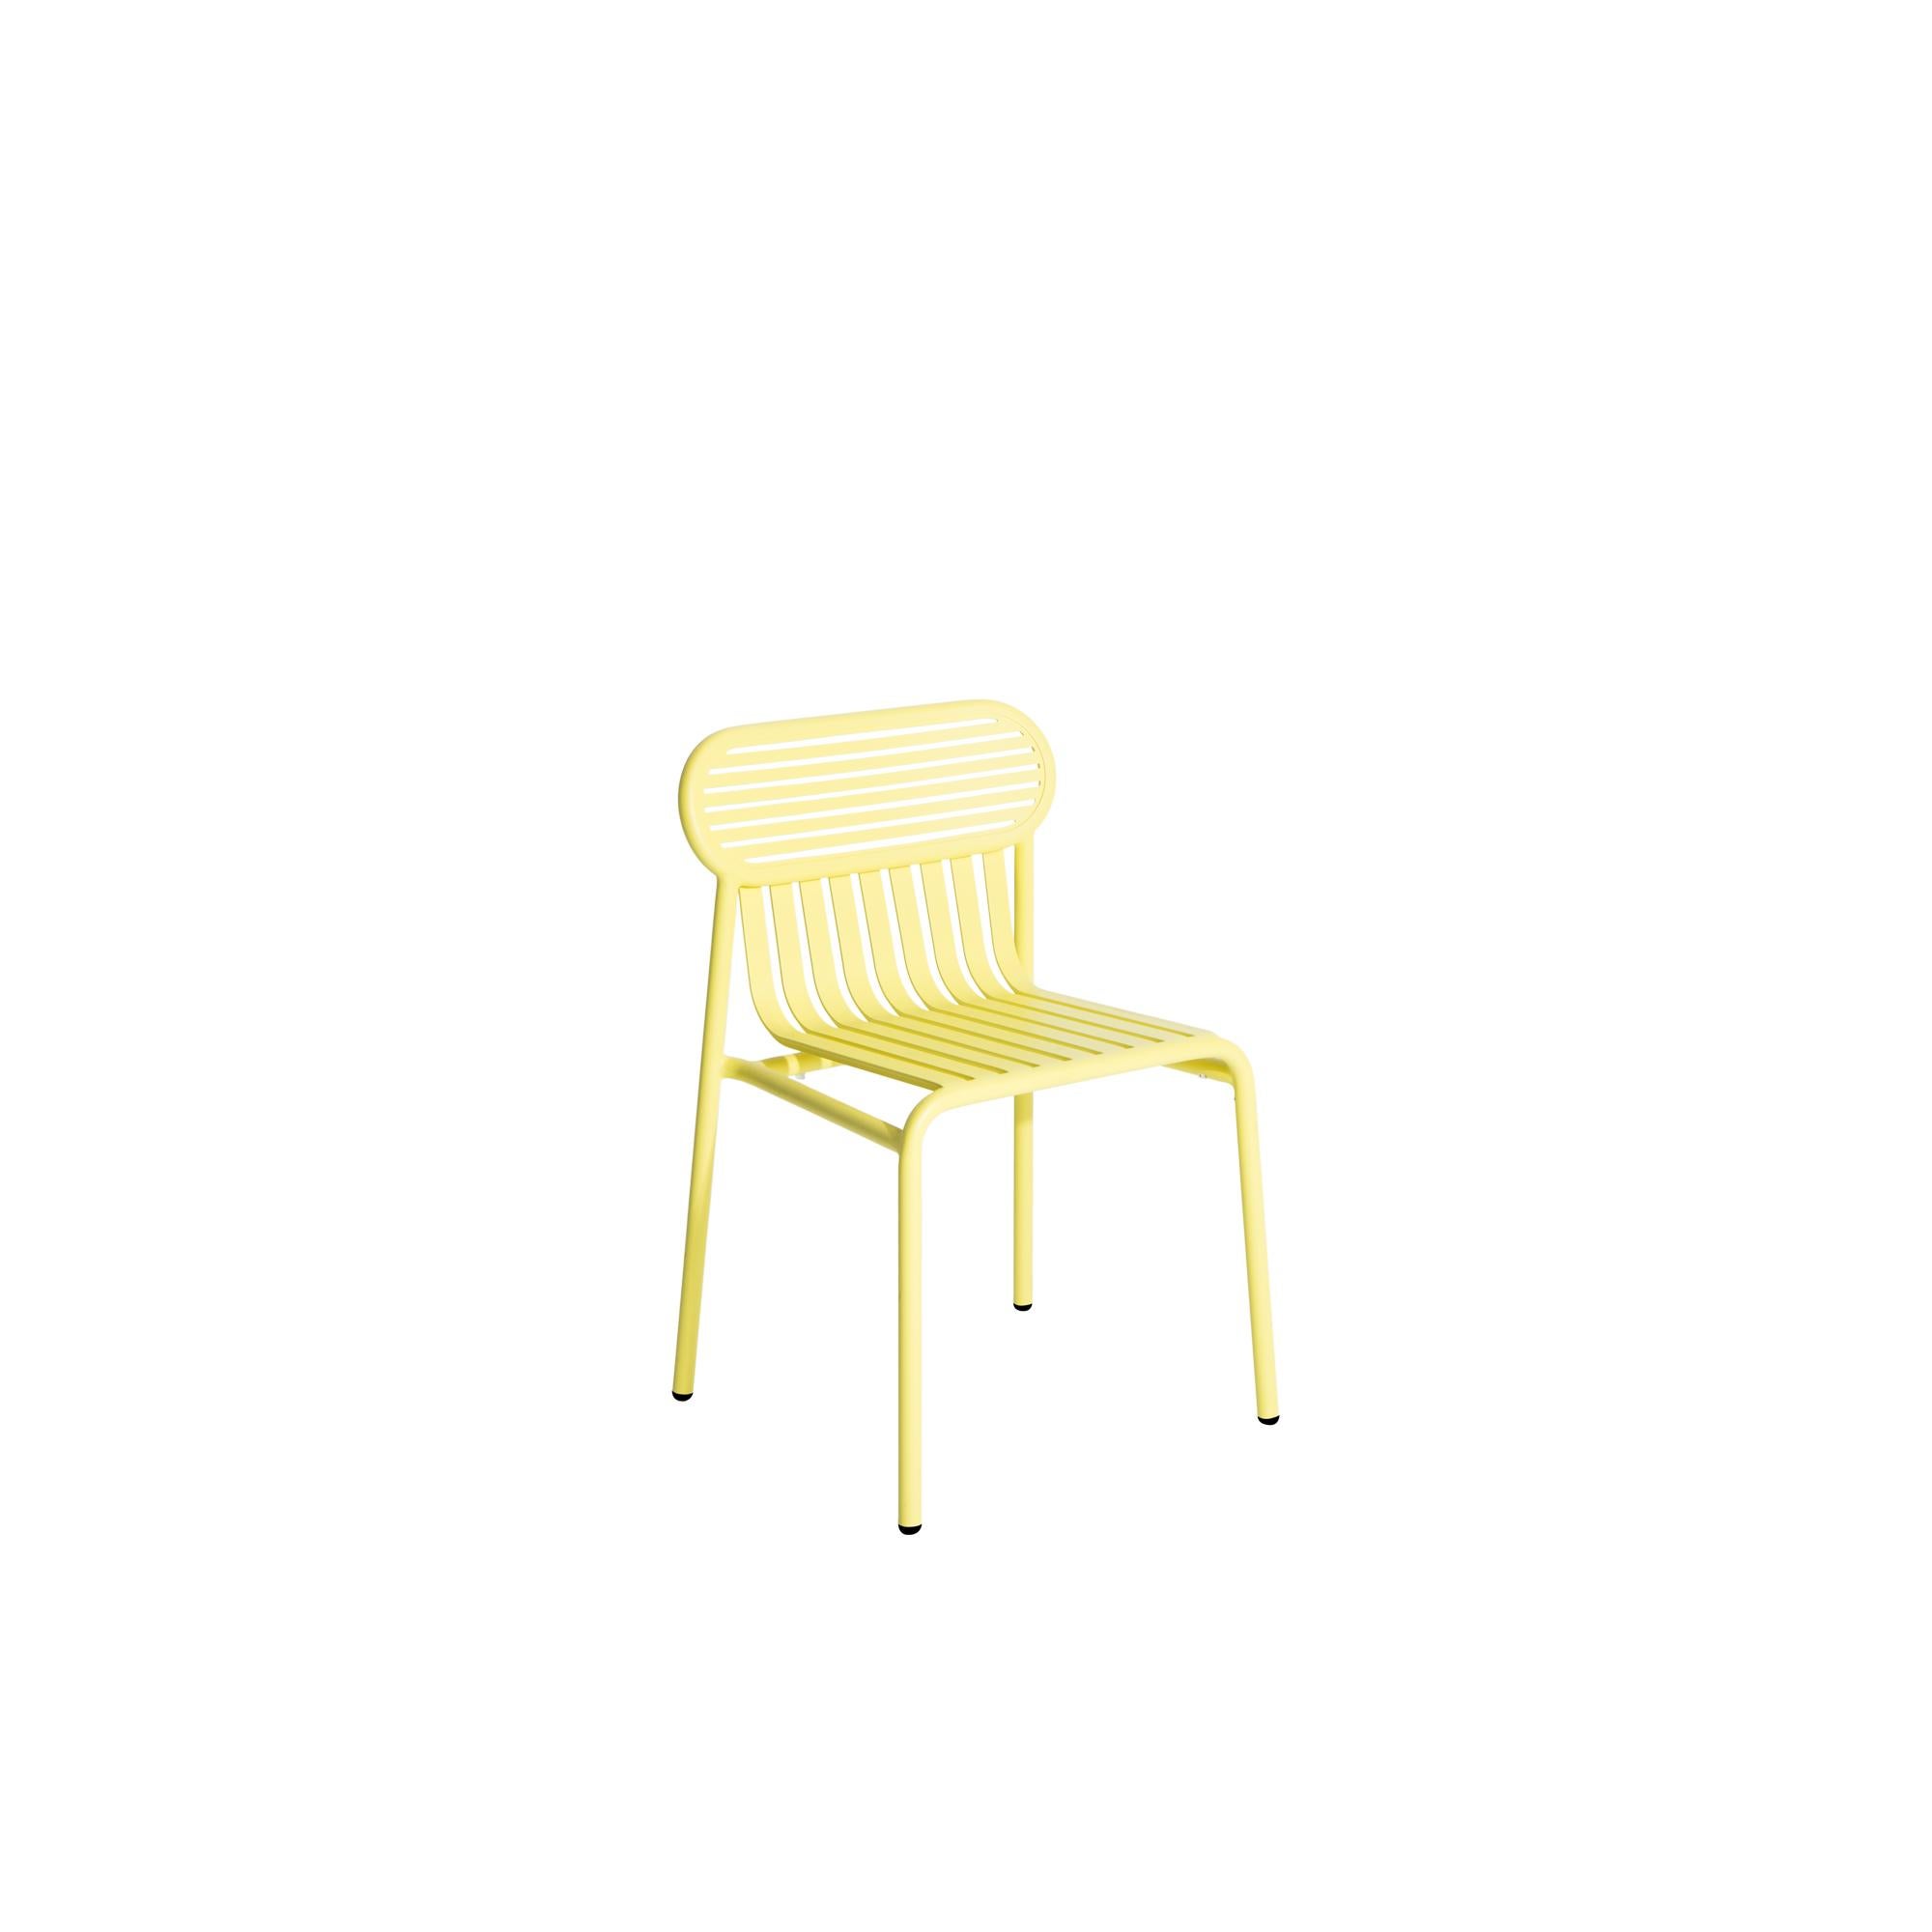 Petite Friture Week-End Chair in Yellow Aluminium by Studio BrichetZiegler, 2017

The week-end collection is a full range of outdoor furniture, in aluminium grained epoxy paint, matt finish, that includes 18 functions and 8 colours for the retail